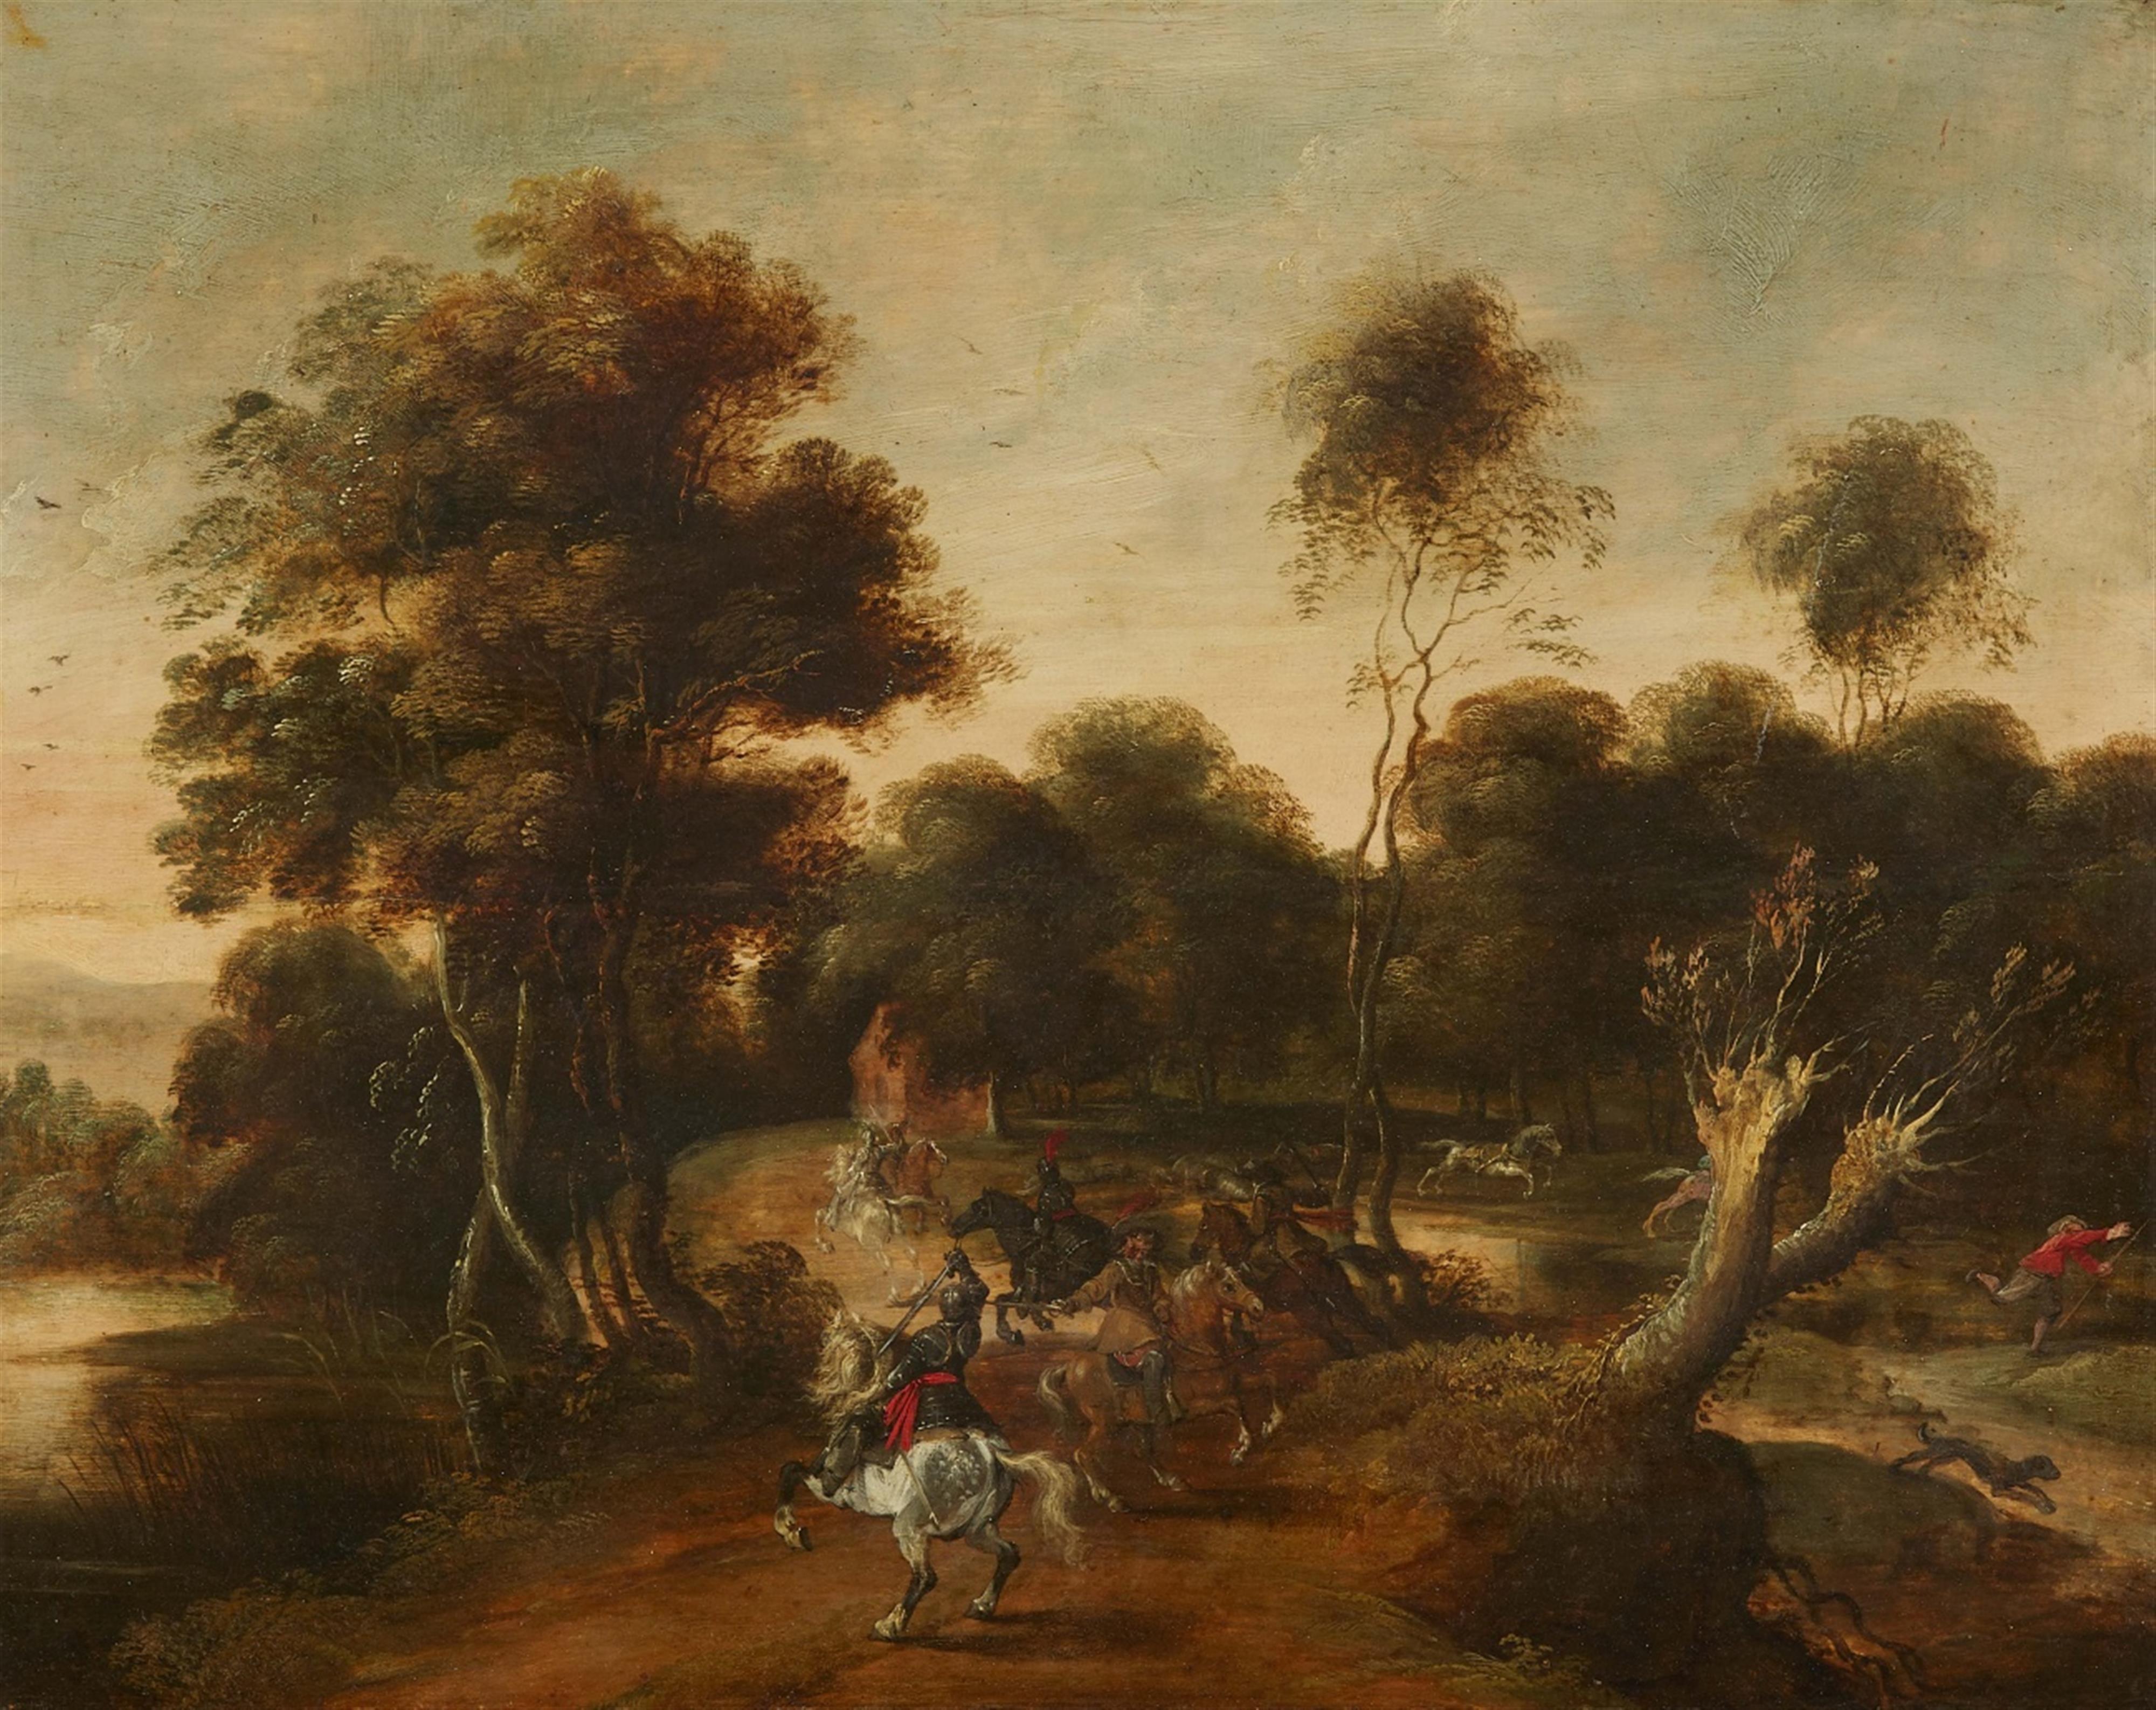 Pieter Snayers, attributed to - Landscape with a Cavalry Battle - image-1